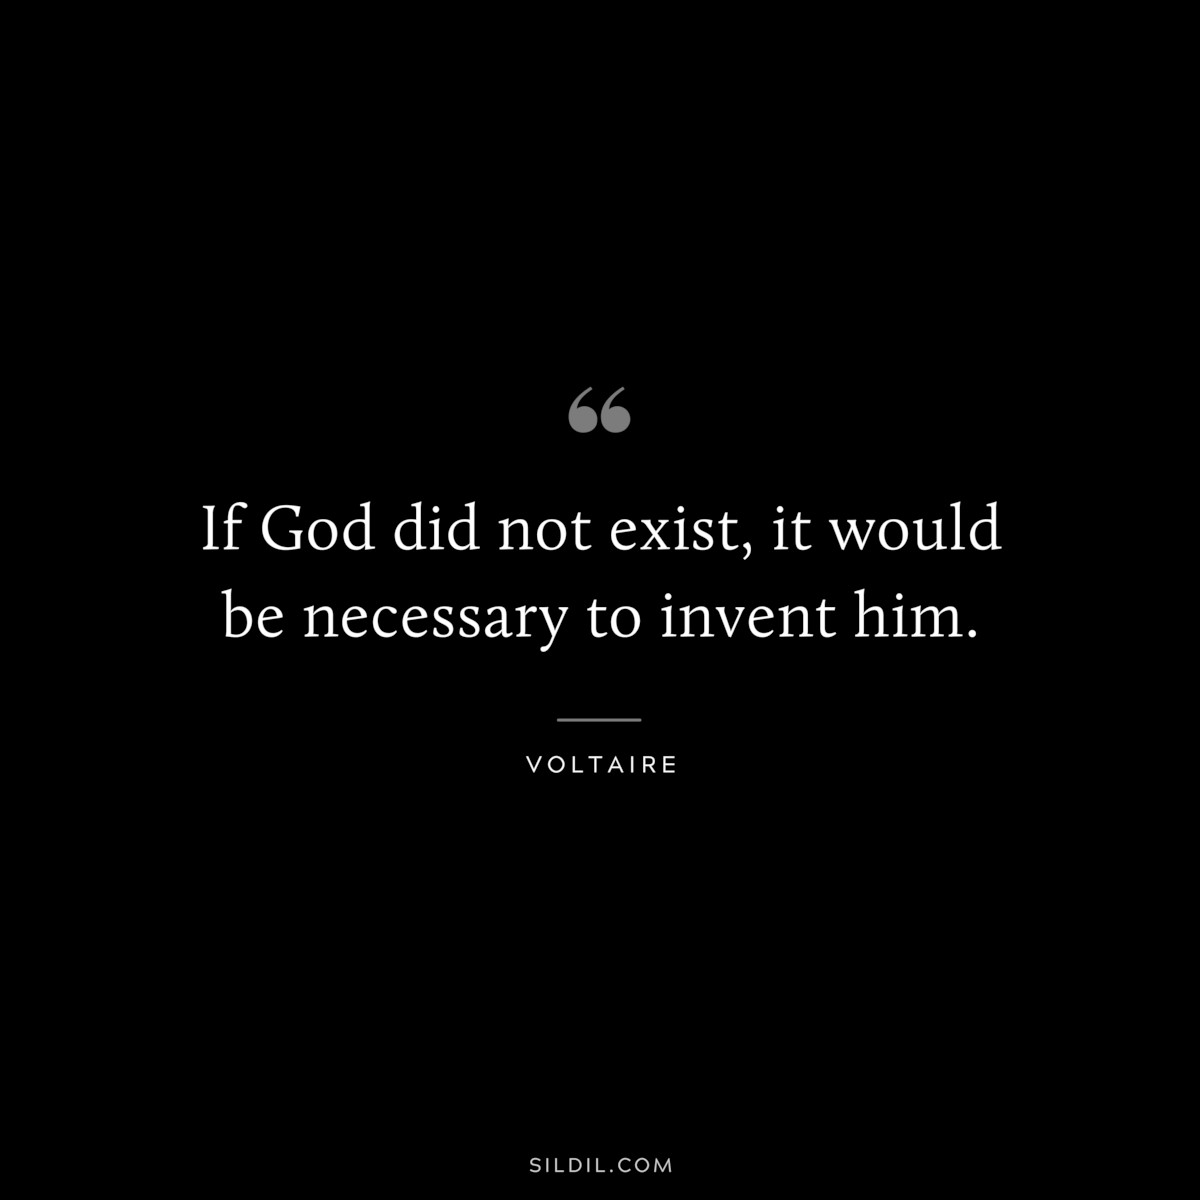 If God did not exist, it would be necessary to invent him. ― Voltaire